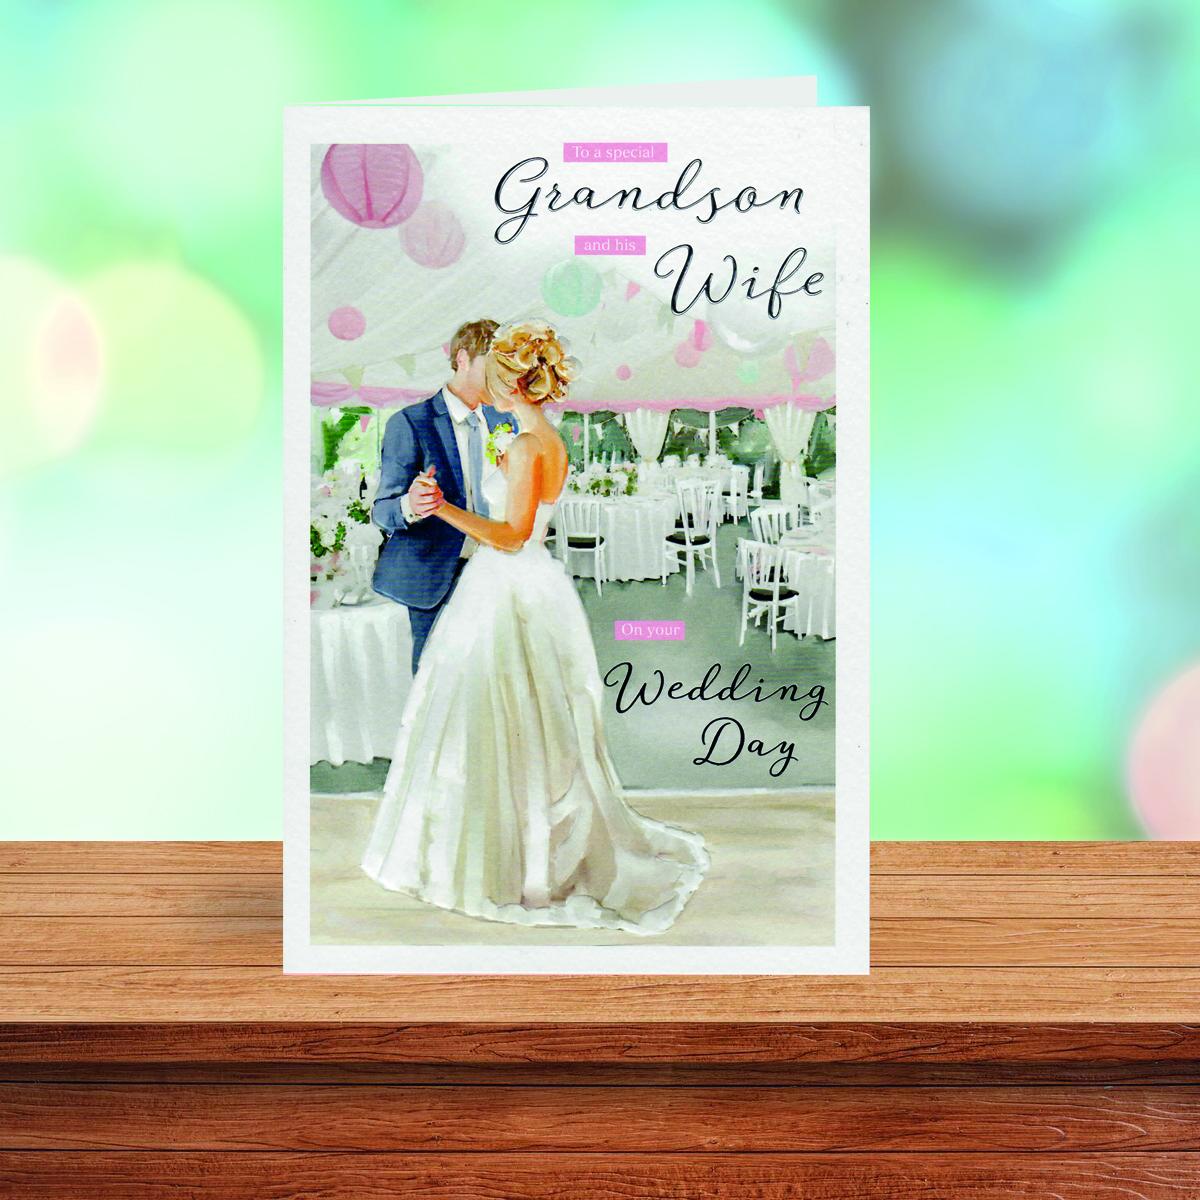 A Selection Of Cards To Show The Depth Of Range In Our Grandson And Wife Wedding Cards Section